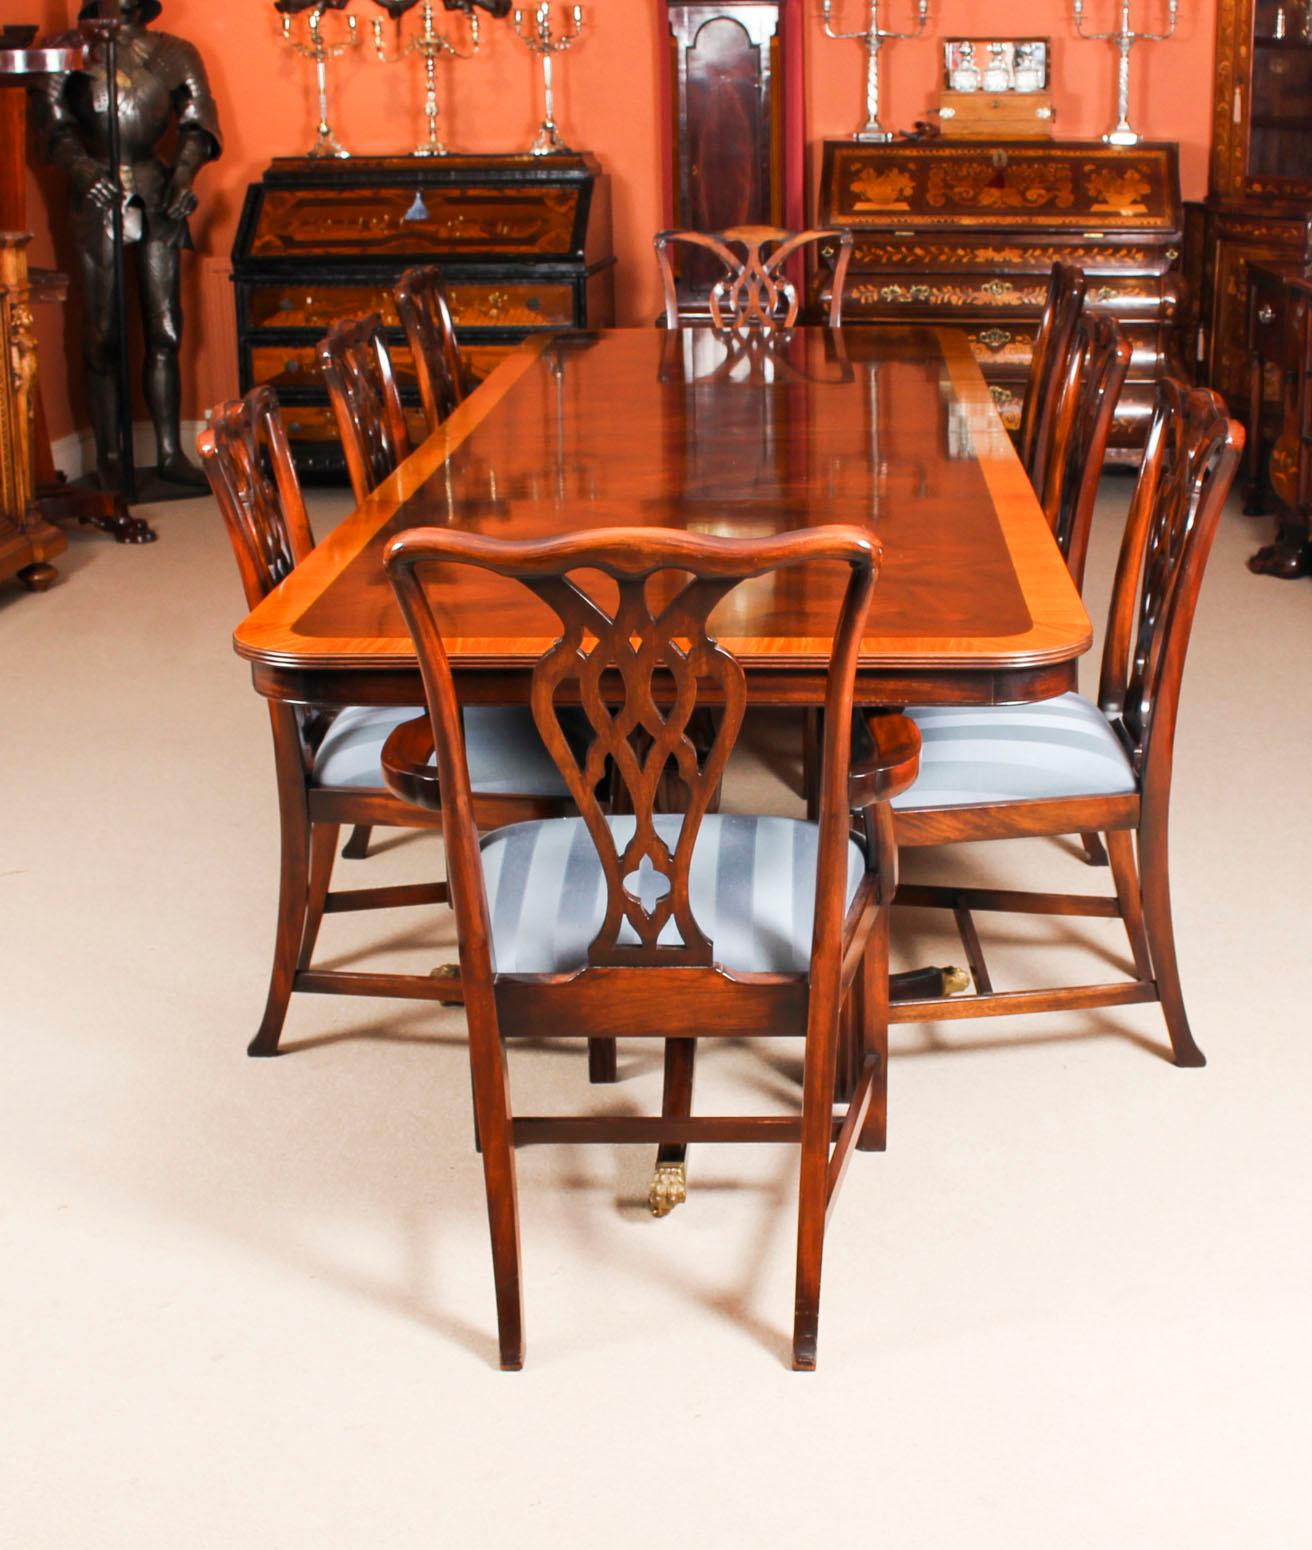 This is a beautiful dining set which comprises a flame mahogany twin pillar dining table and the matching set of eight chairs, mid-20th century in date.
There is no mistaking the fine craftsmanship of this handsome set, made by Rackstraw of